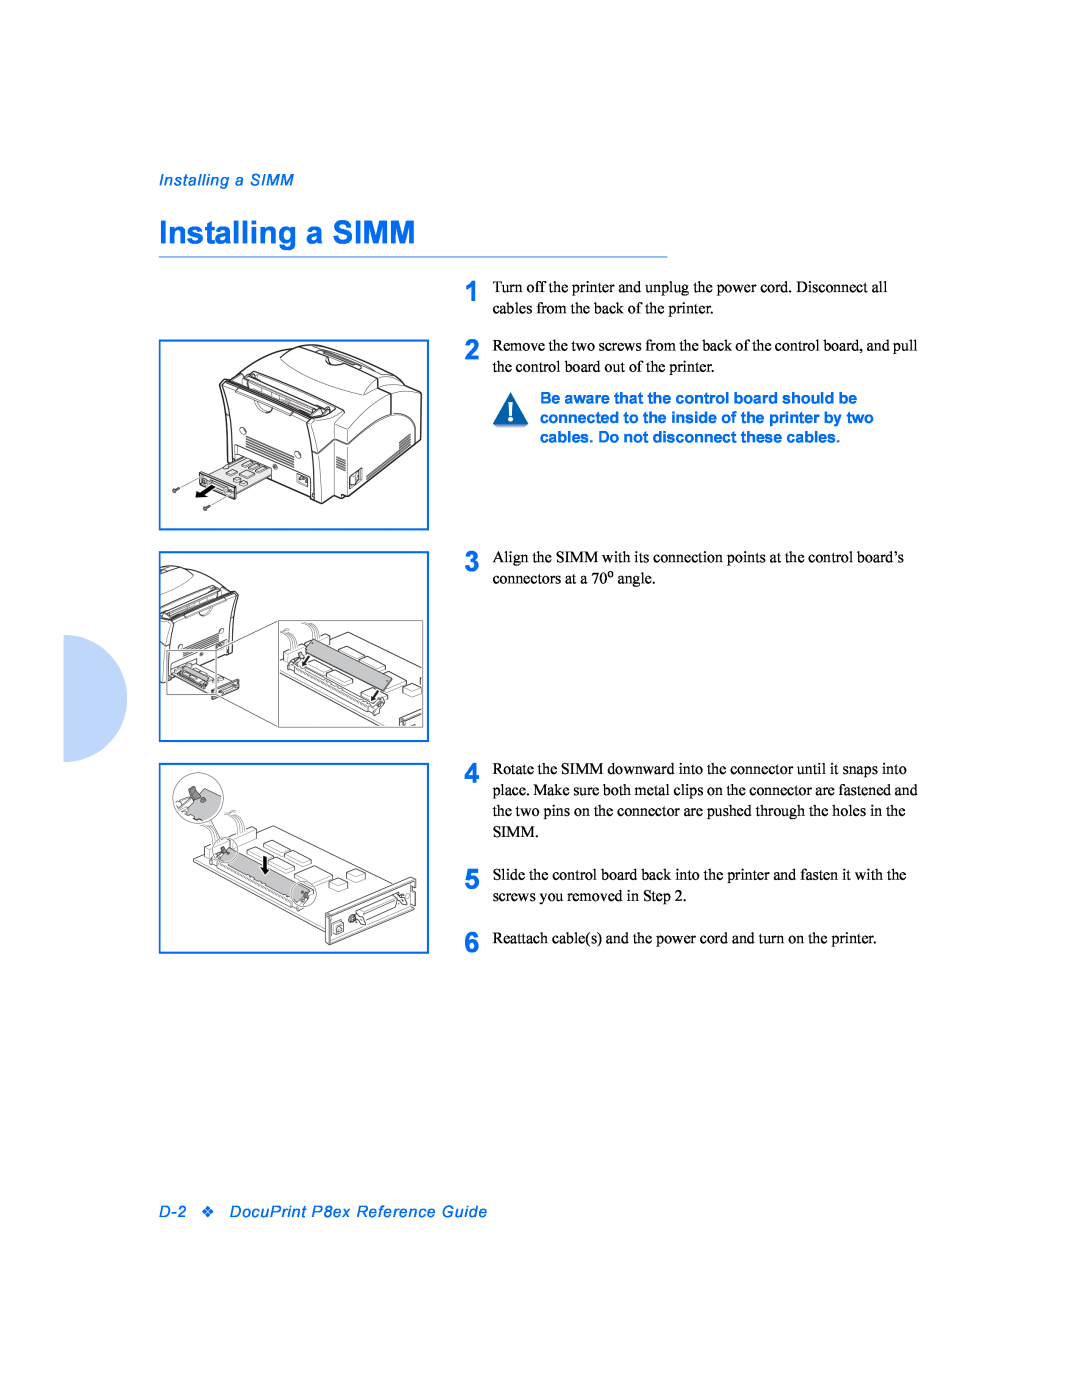 Xerox manual Installing a SIMM, D-2DocuPrint P8ex Reference Guide 